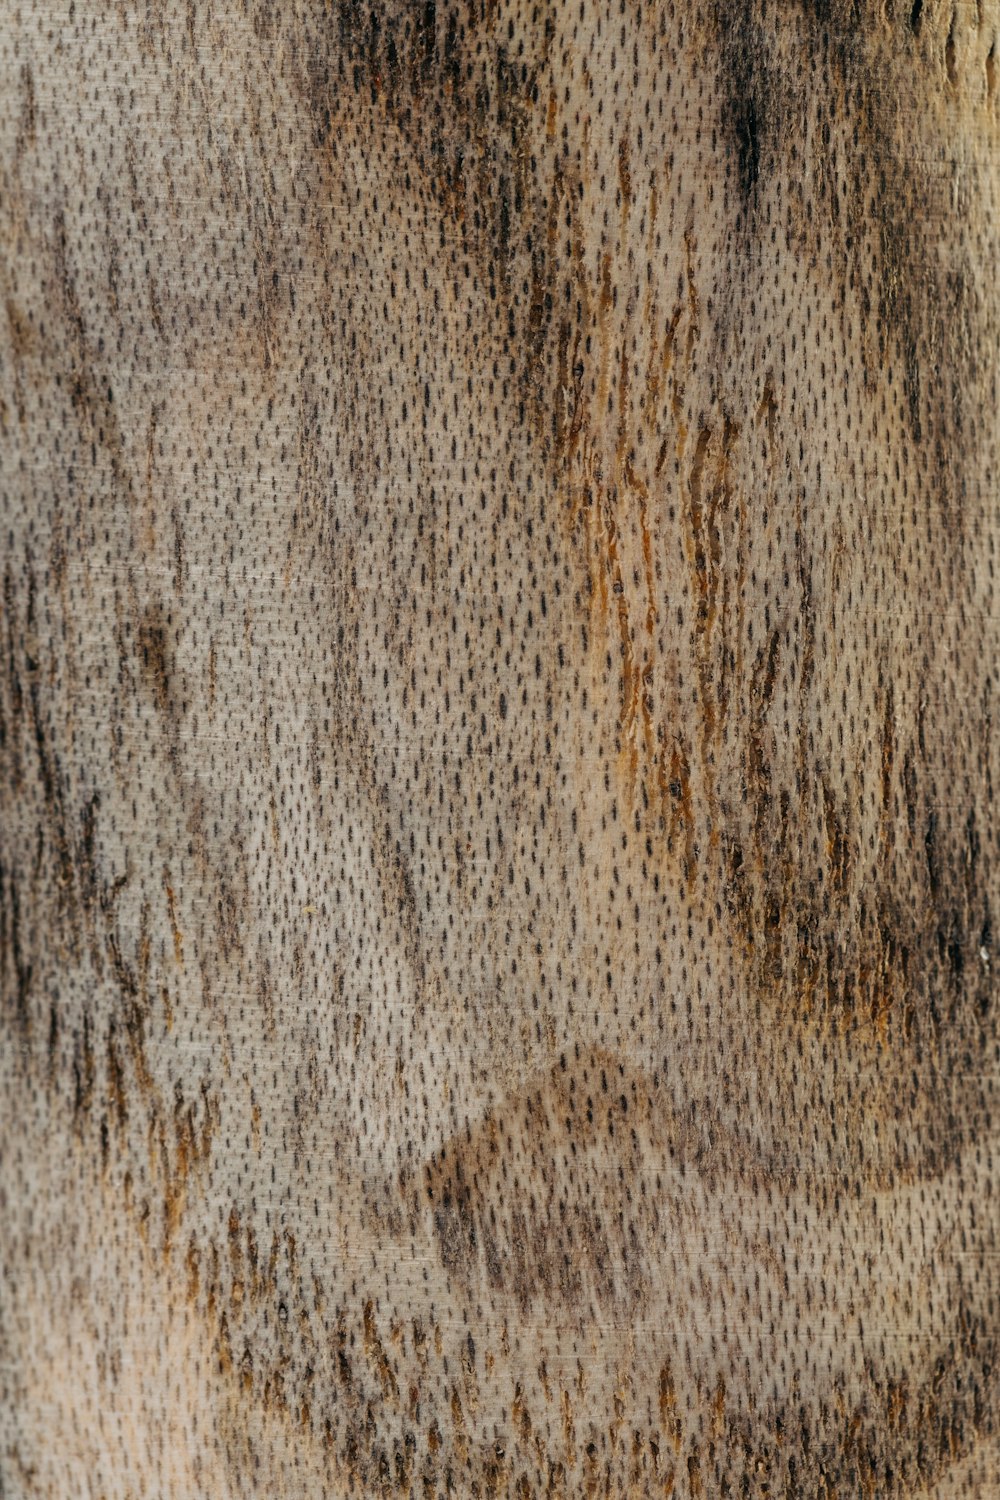 a close up of a cow's fur texture